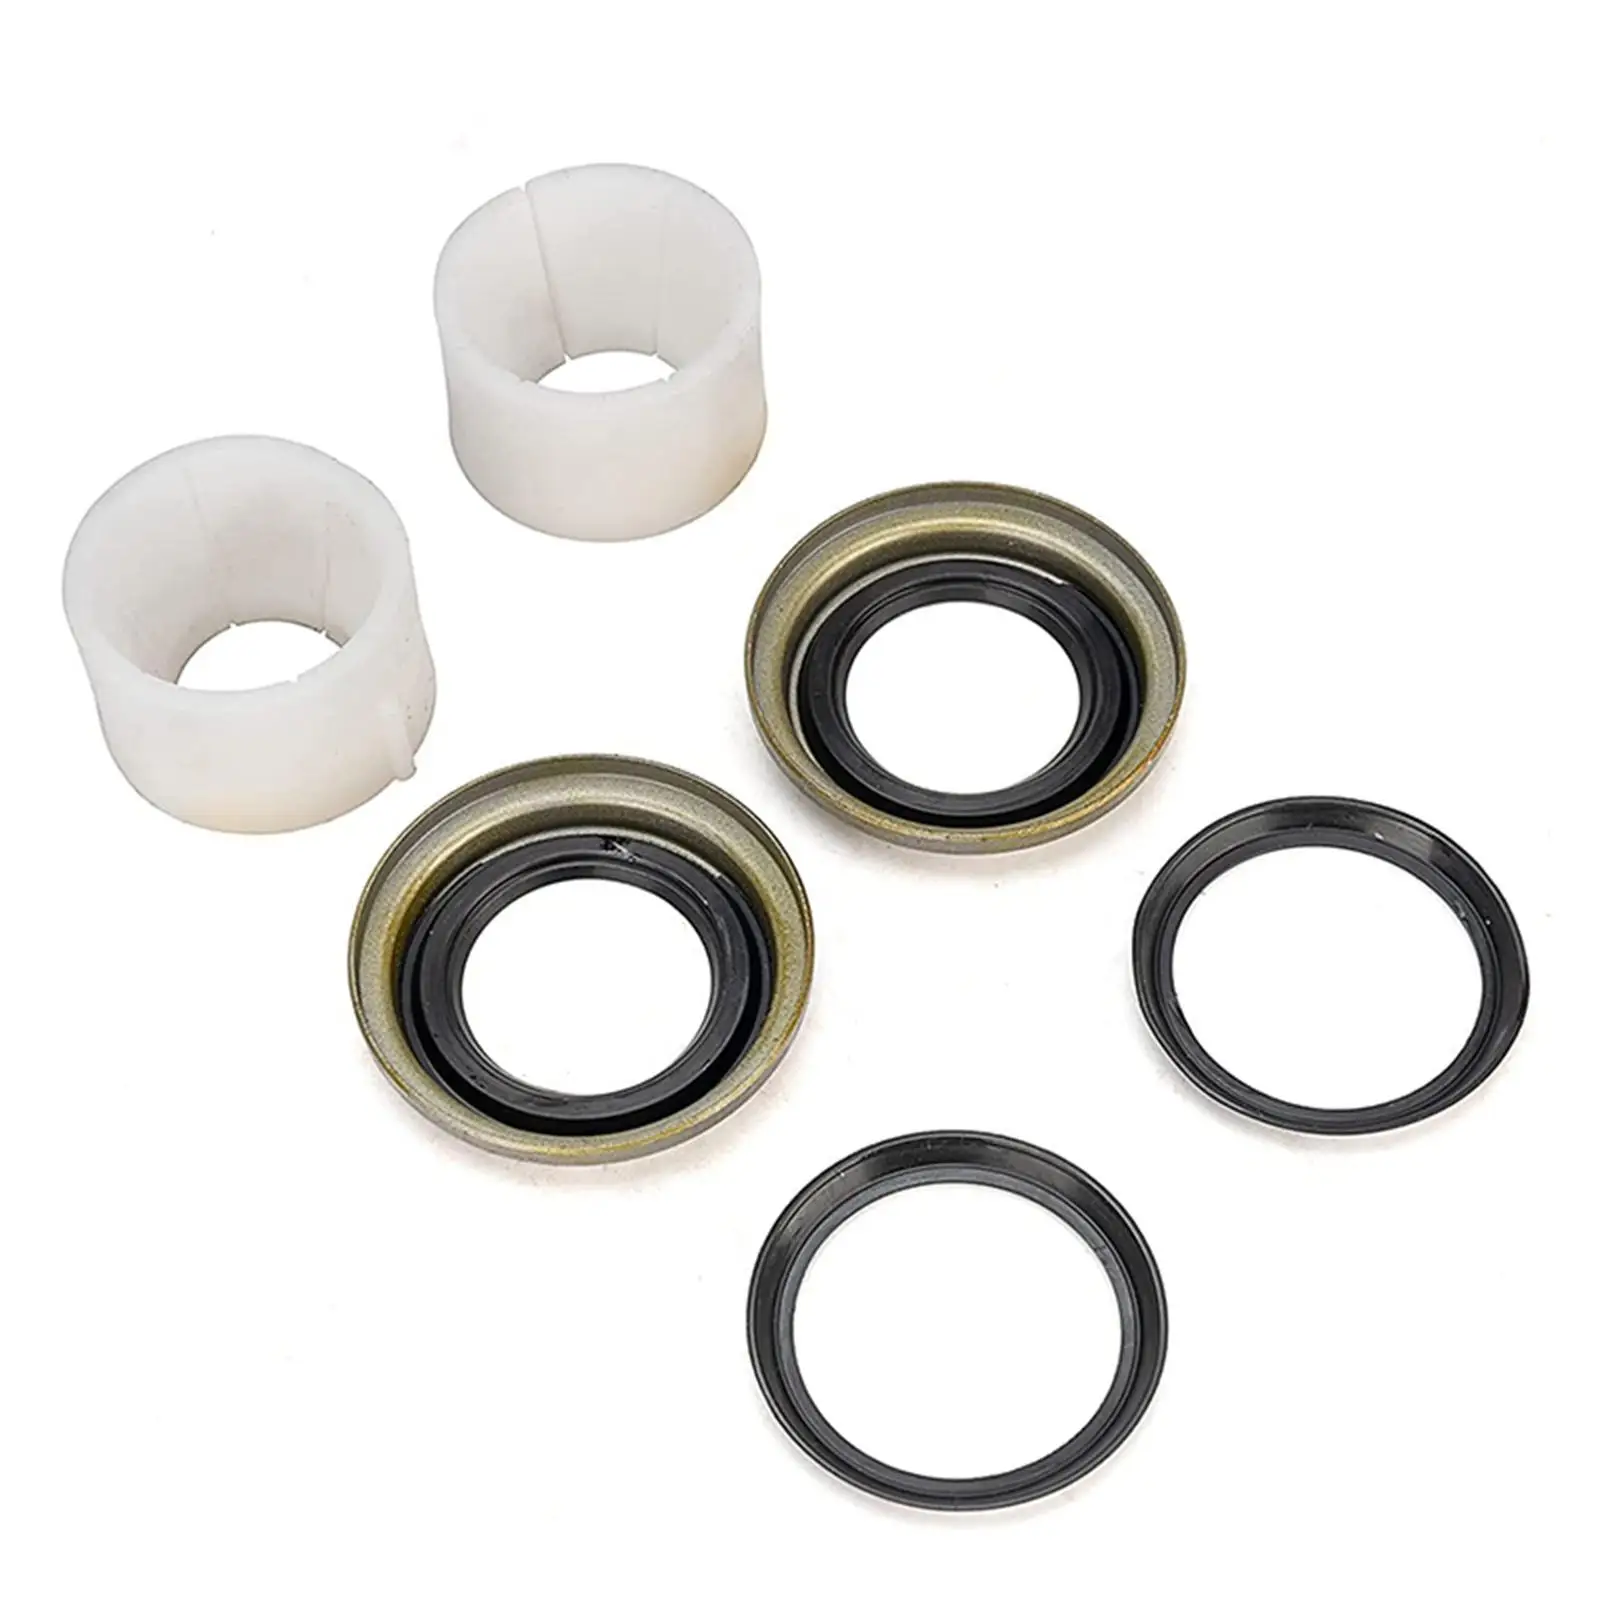 Kingpin Bearing Seal Rebuild Kit 706395x Replacement 41886 620180 37307 for Ford Dana 60 Accessories High Performance